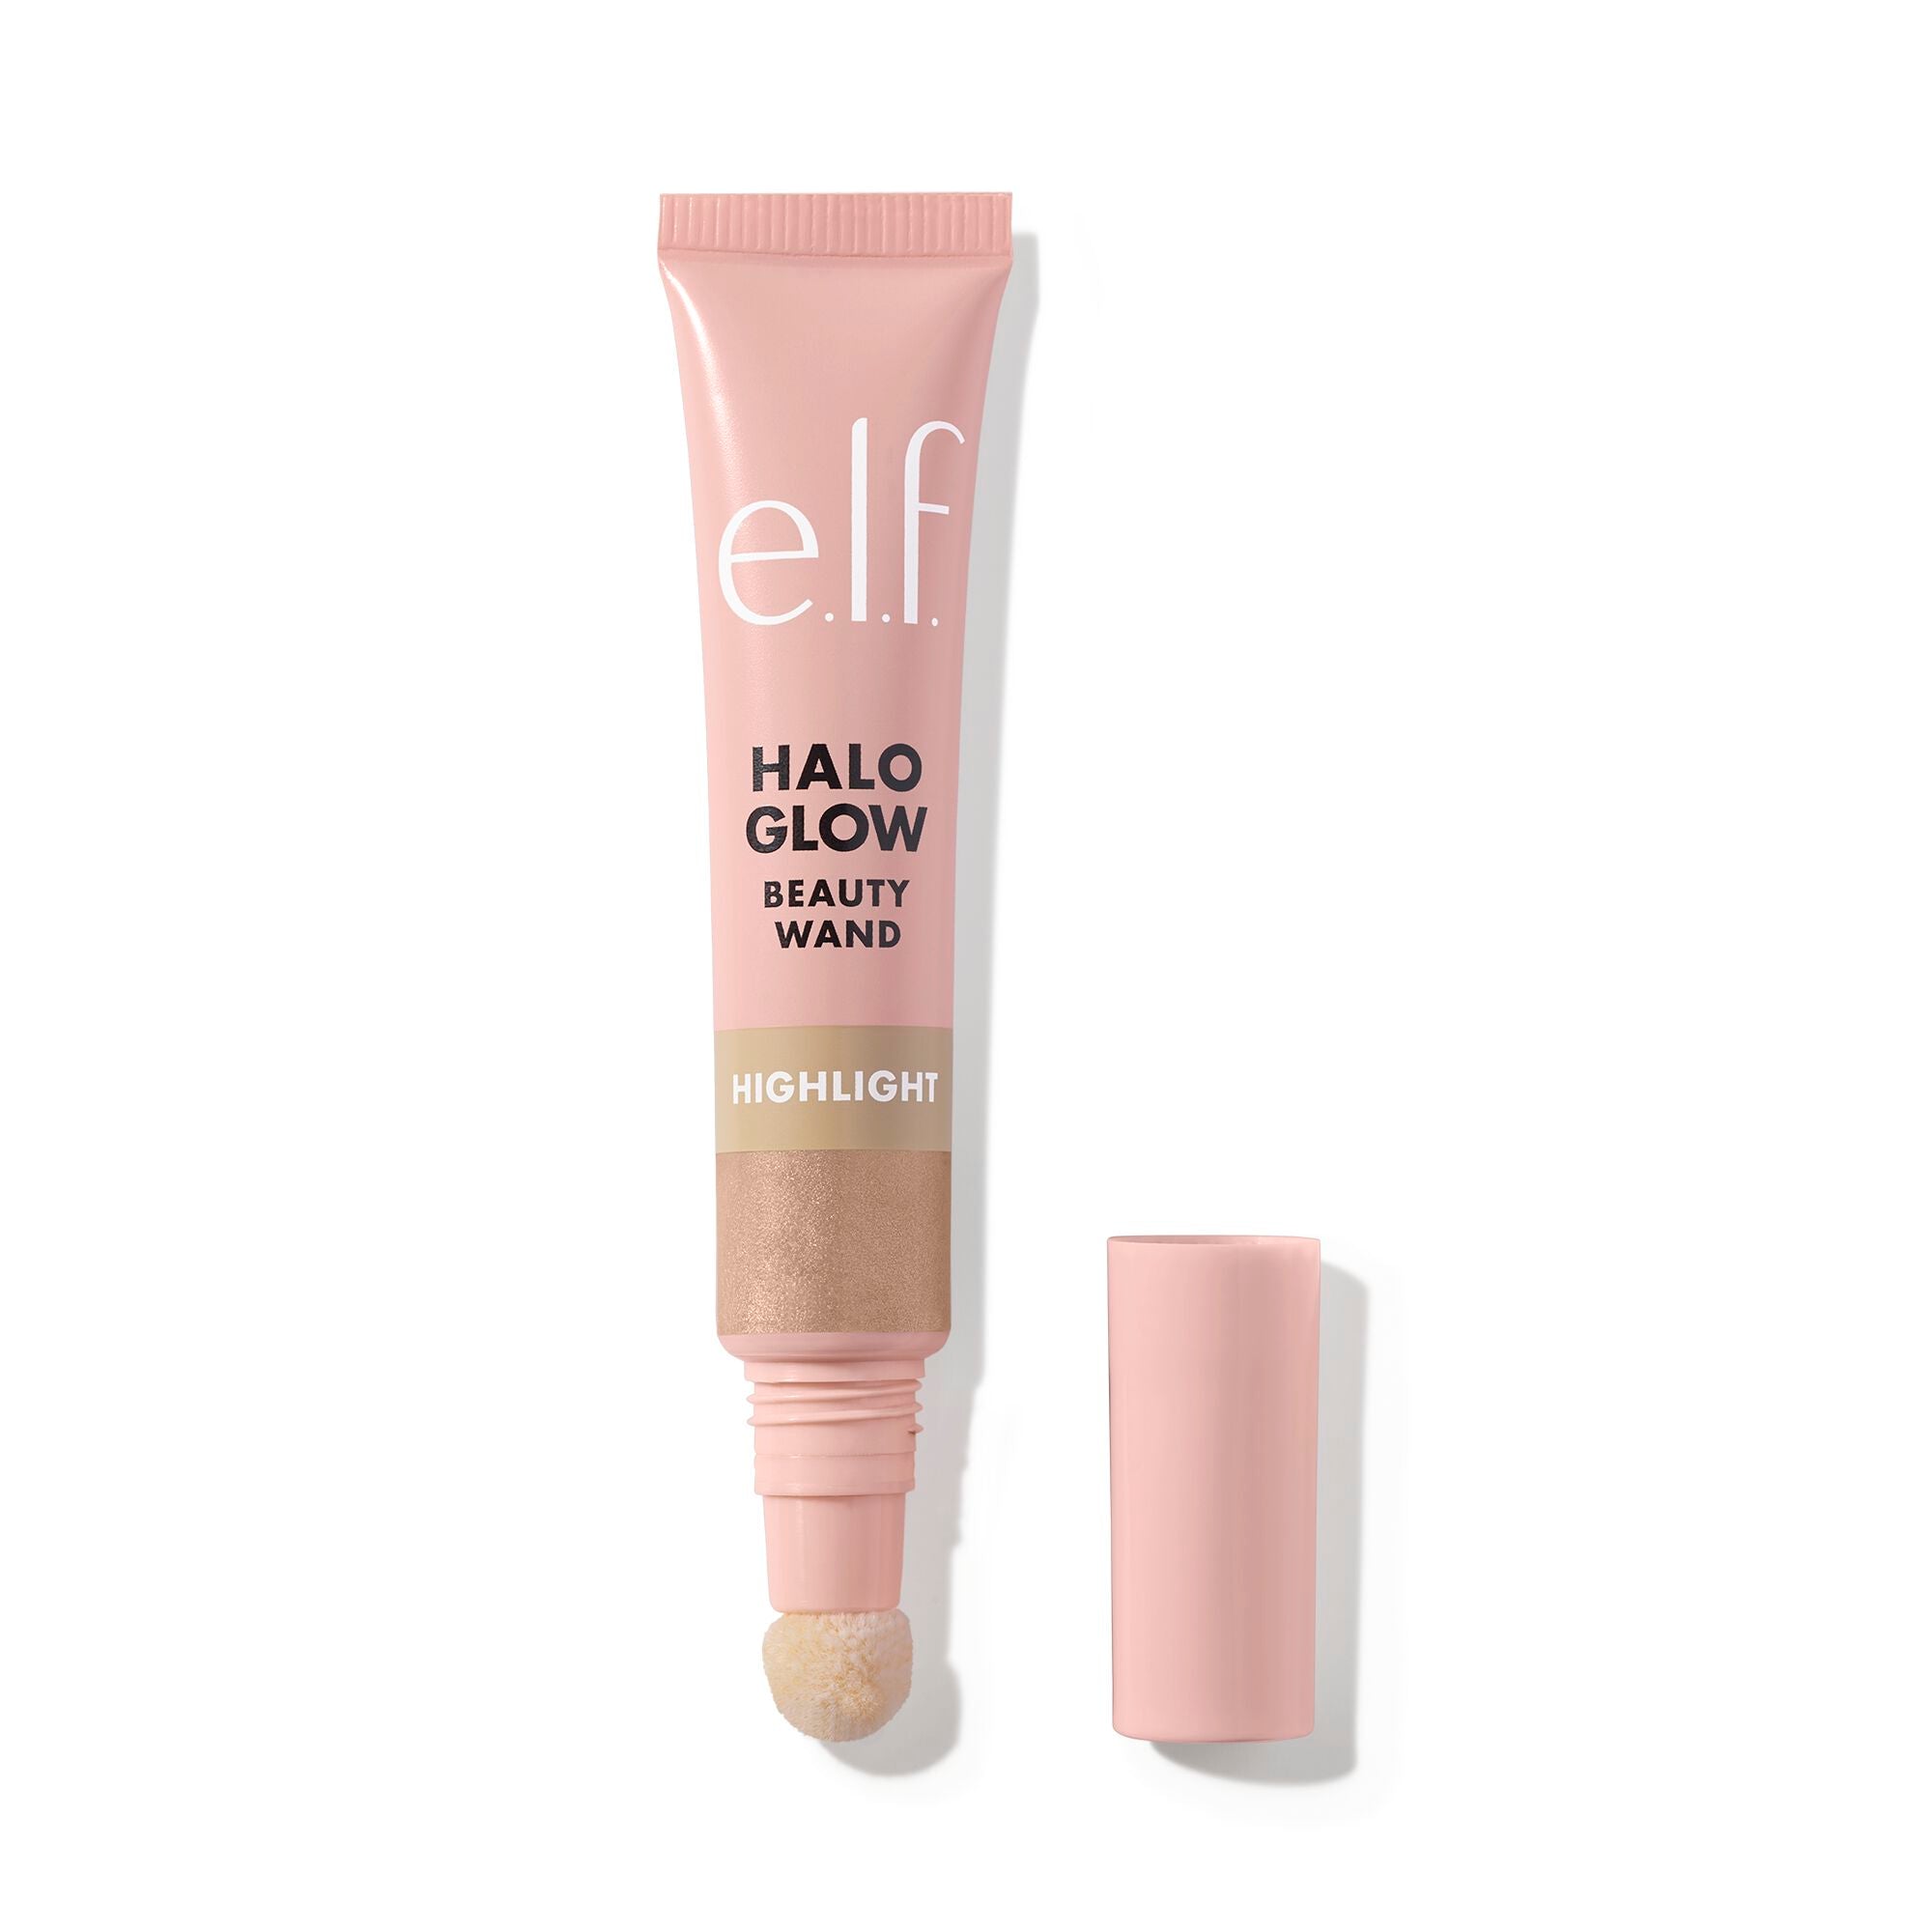 Halo Glow Highlight Beauty Wand Champagne Campaign - Champagne Pearl For Fair/Tan